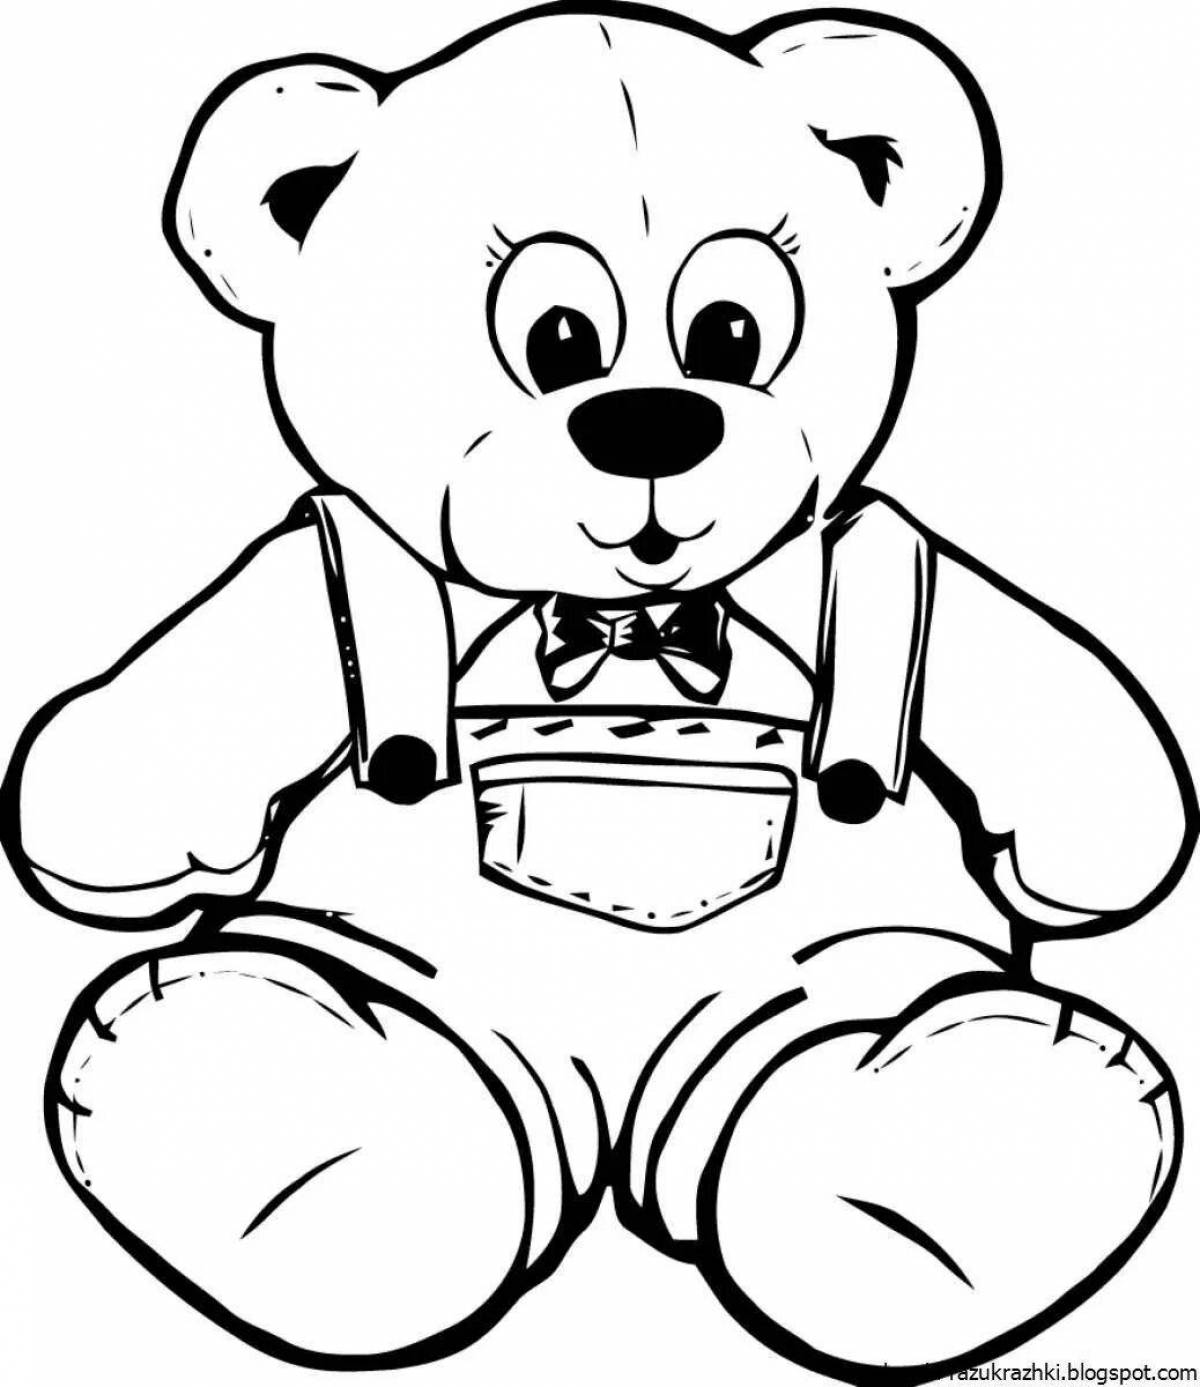 Dreamy teddy bear coloring book for kids